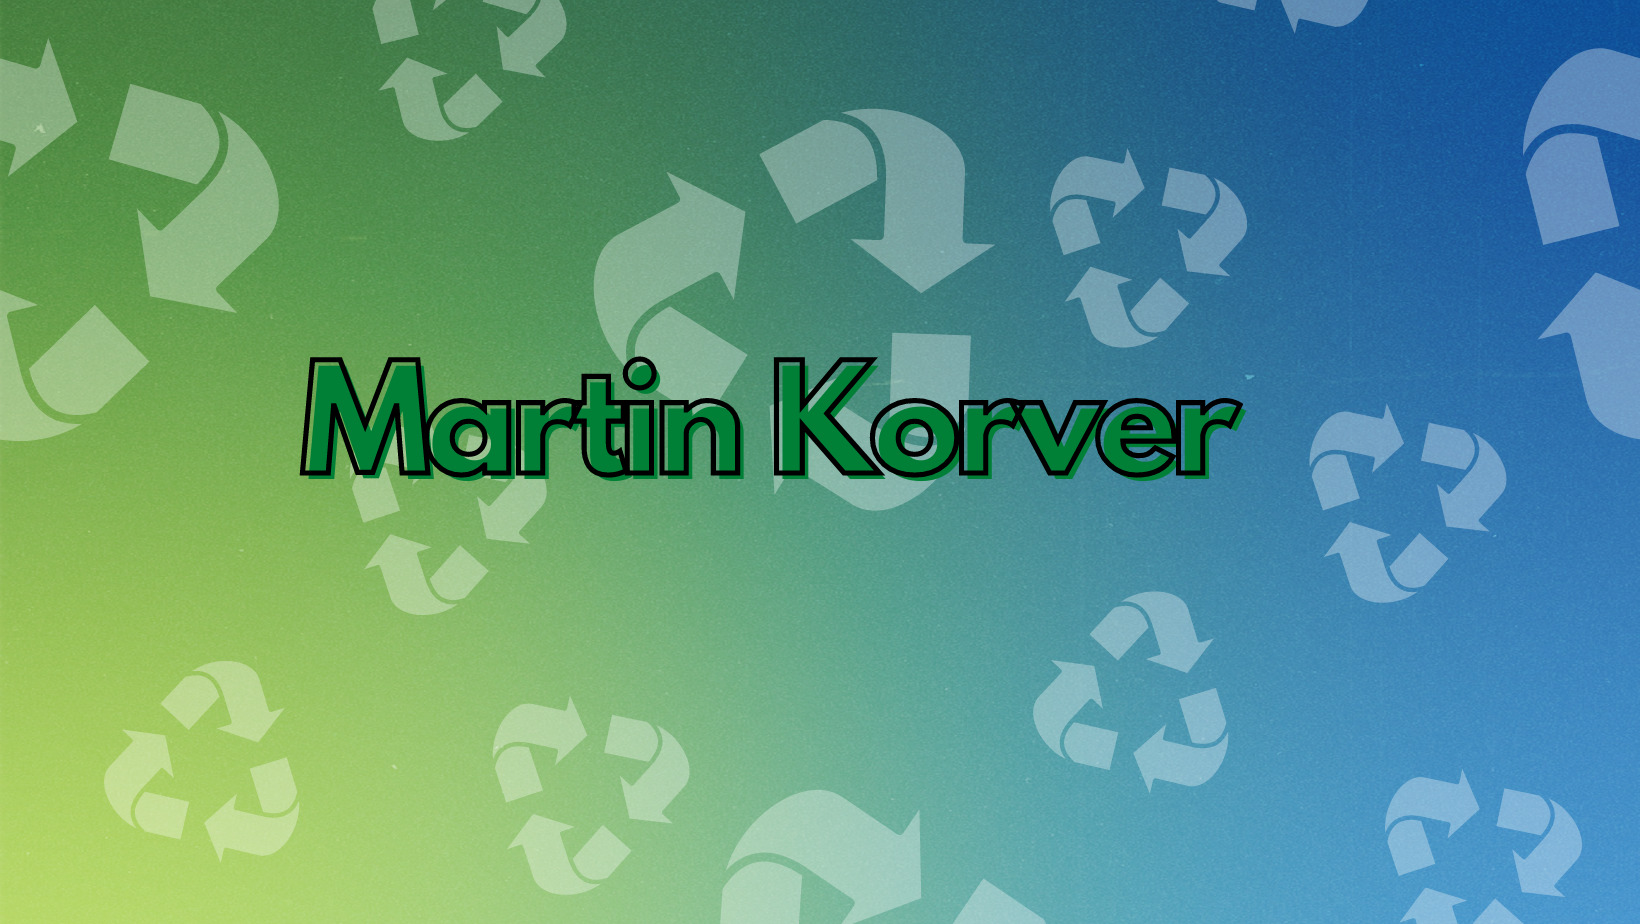 Martin Korver on what matters for businesses in Africa